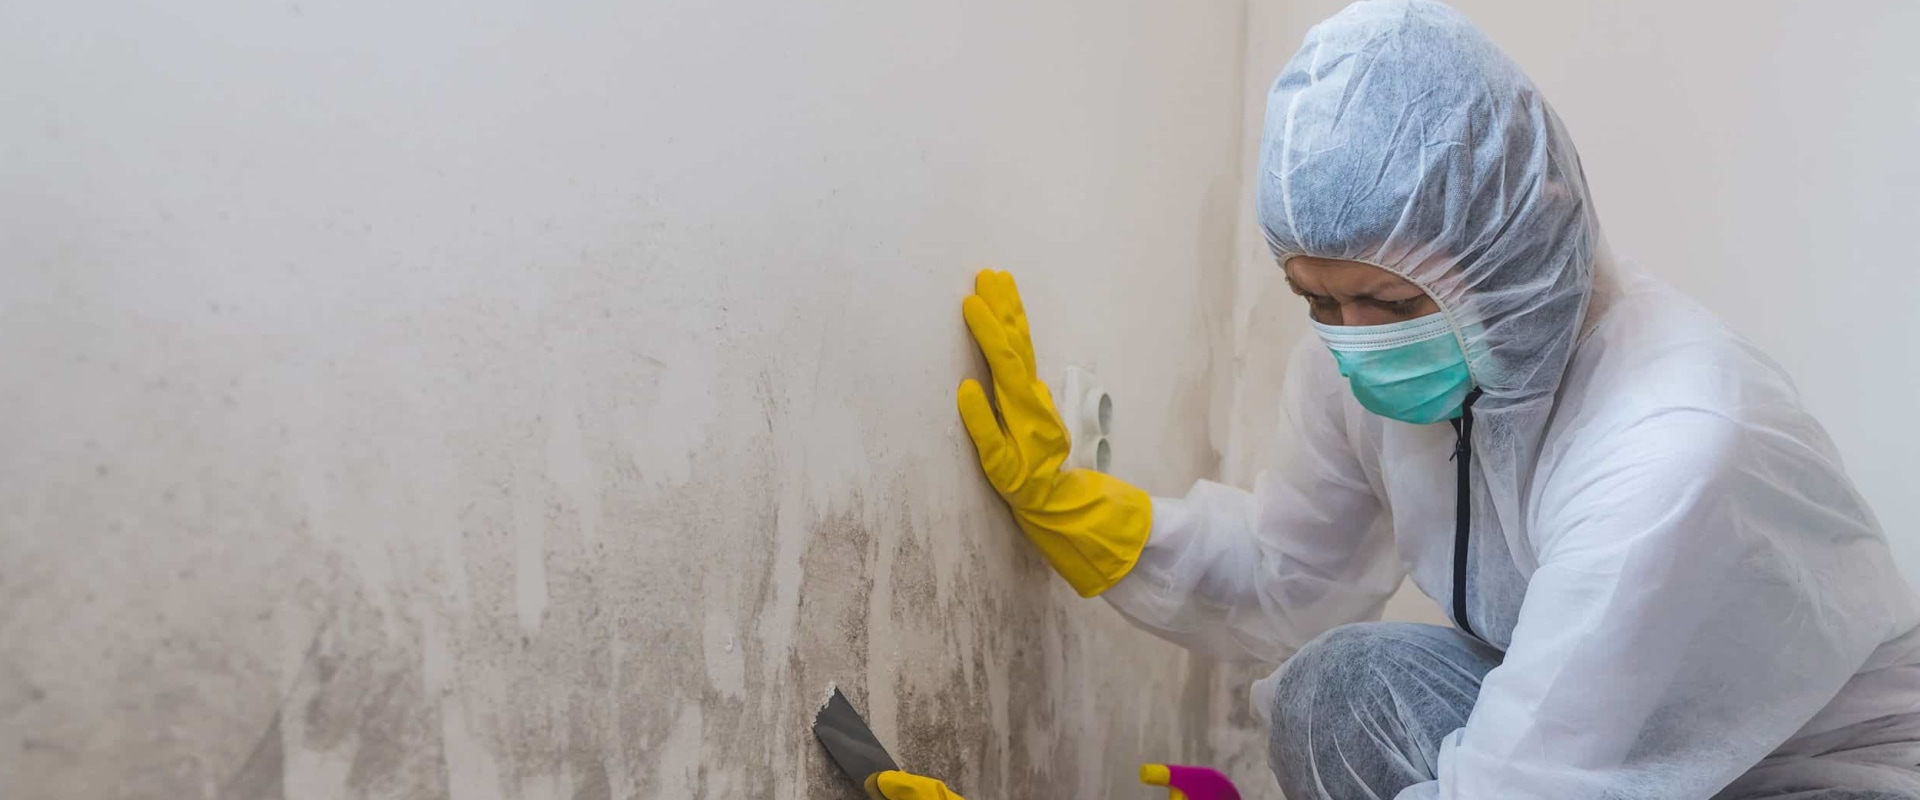 Is mold inspection free?